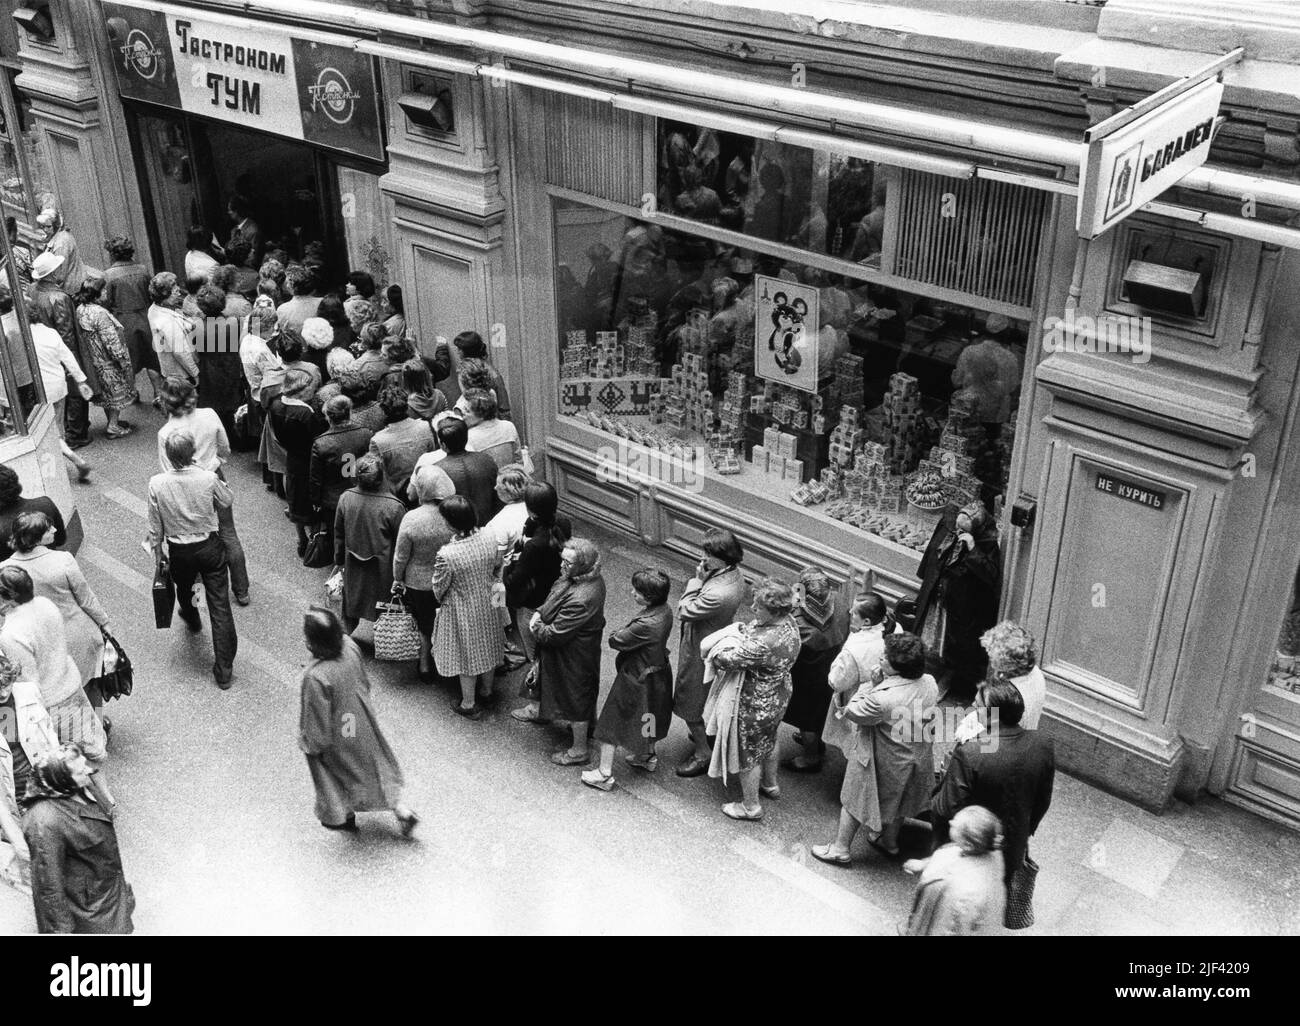 MOSCOW SOVIET UNION 1978 Queues outside the store in the old Soviet Stock Photo